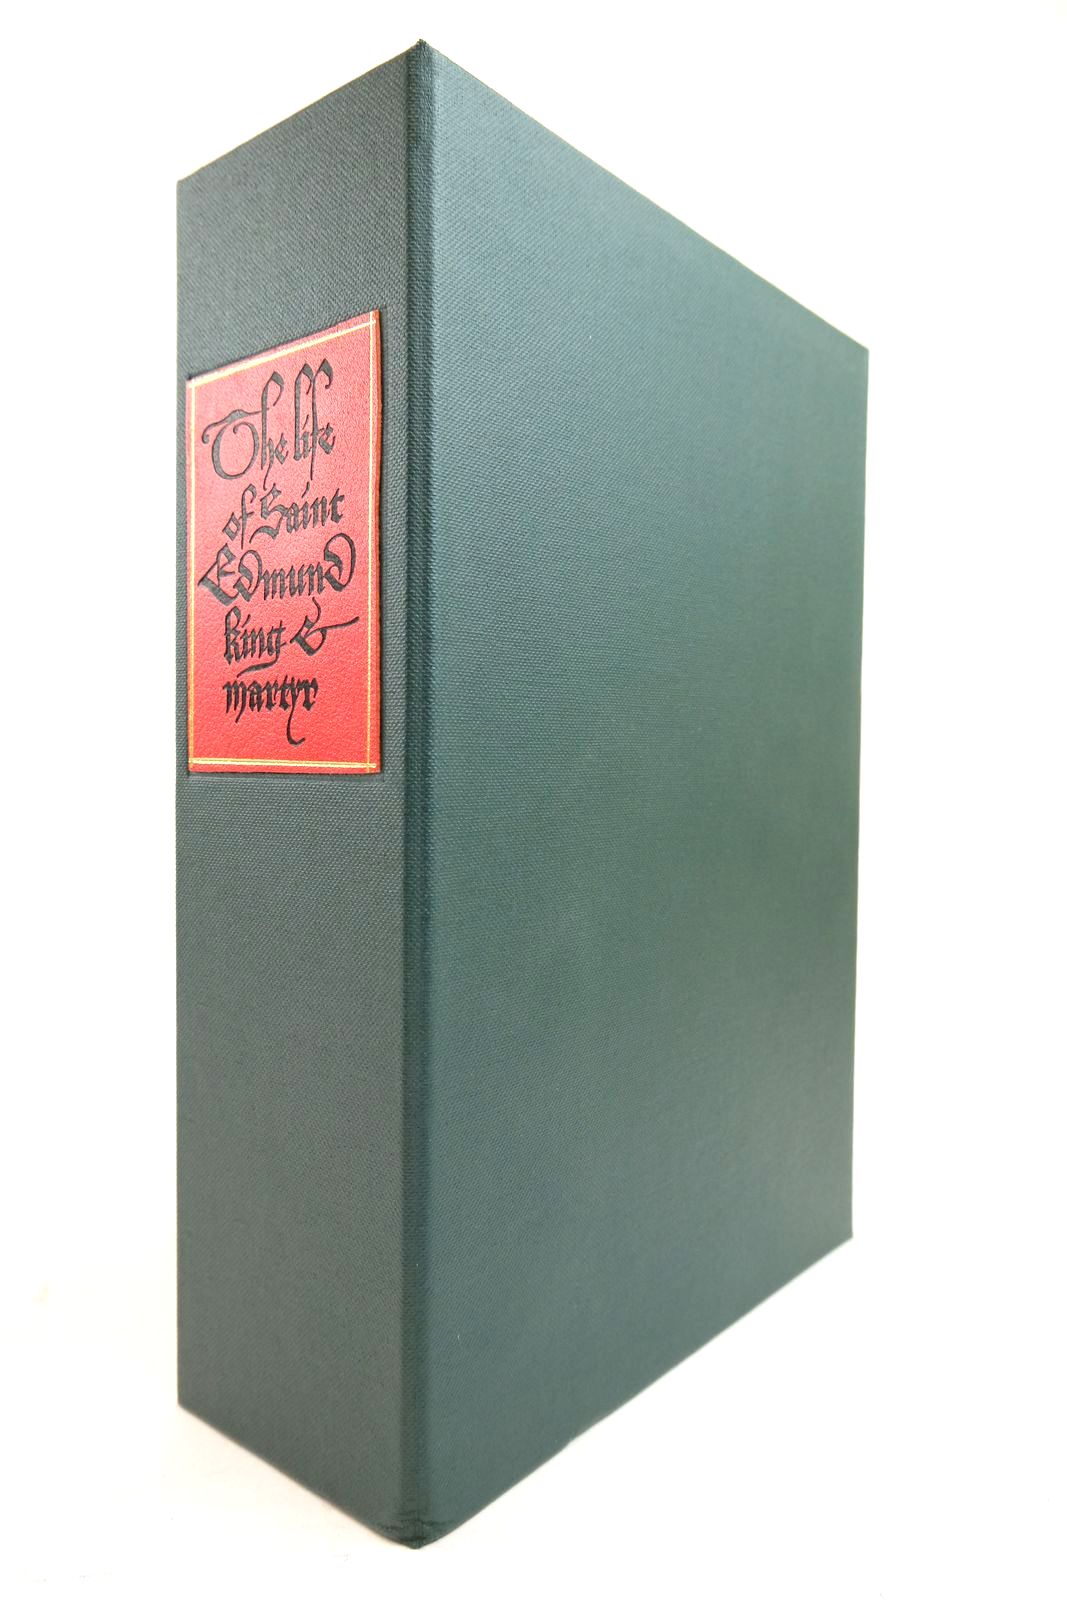 Photo of THE LIFE OF SAINT EDMUND KING & MARTYR written by Lydgate, John
Edwards, A.S.G. published by Folio Society (STOCK CODE: 2134708)  for sale by Stella & Rose's Books